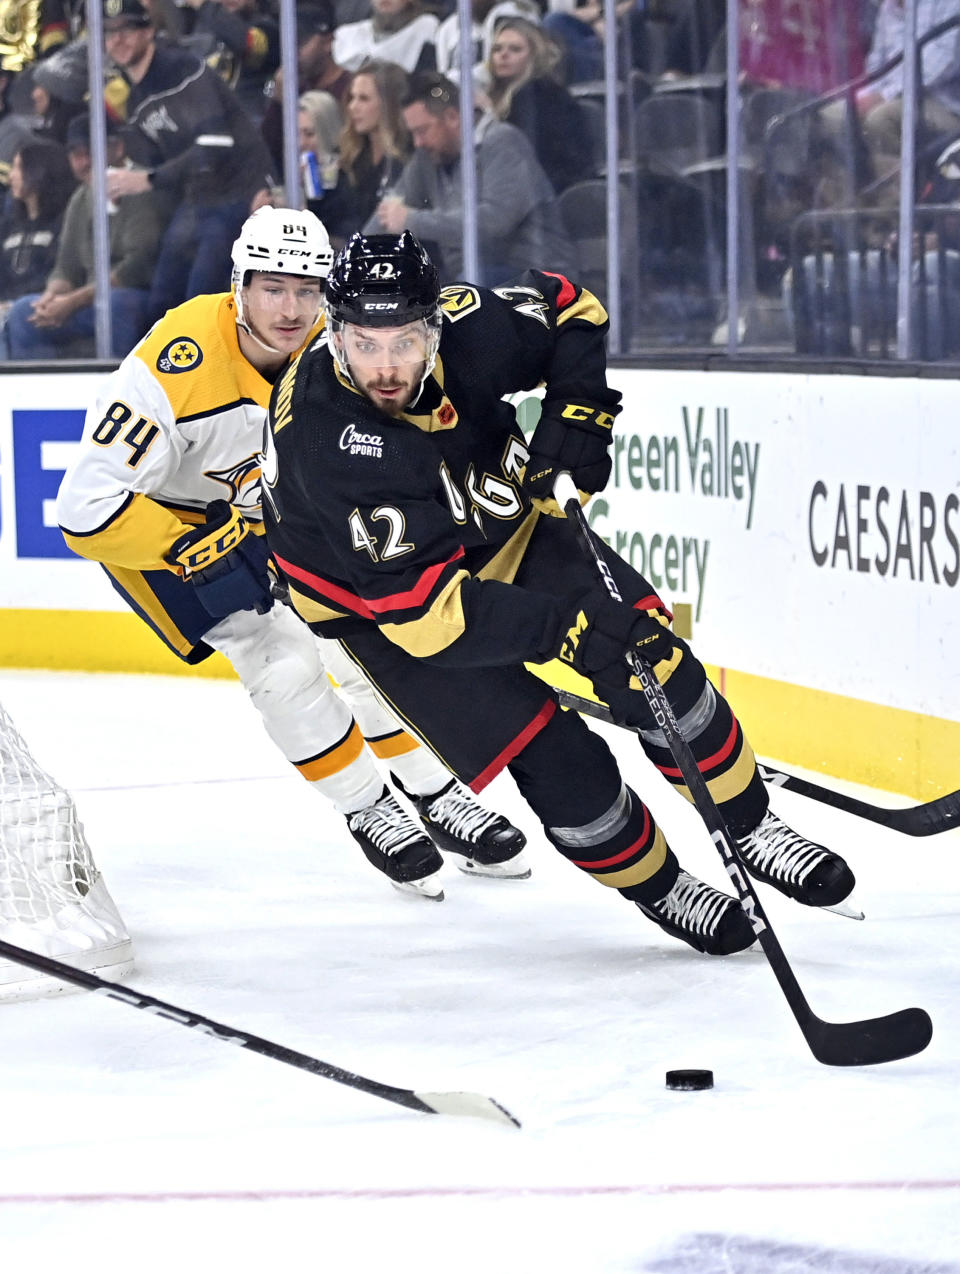 Vegas Golden Knights defenseman Daniil Miromanov (42) skate with the puck ahead of Nashville Predators left wing Tanner Jeannot (84) during the first period of an NHL hockey game Saturday, Dec. 31, 2022, in Las Vegas. (AP Photo/David Becker)